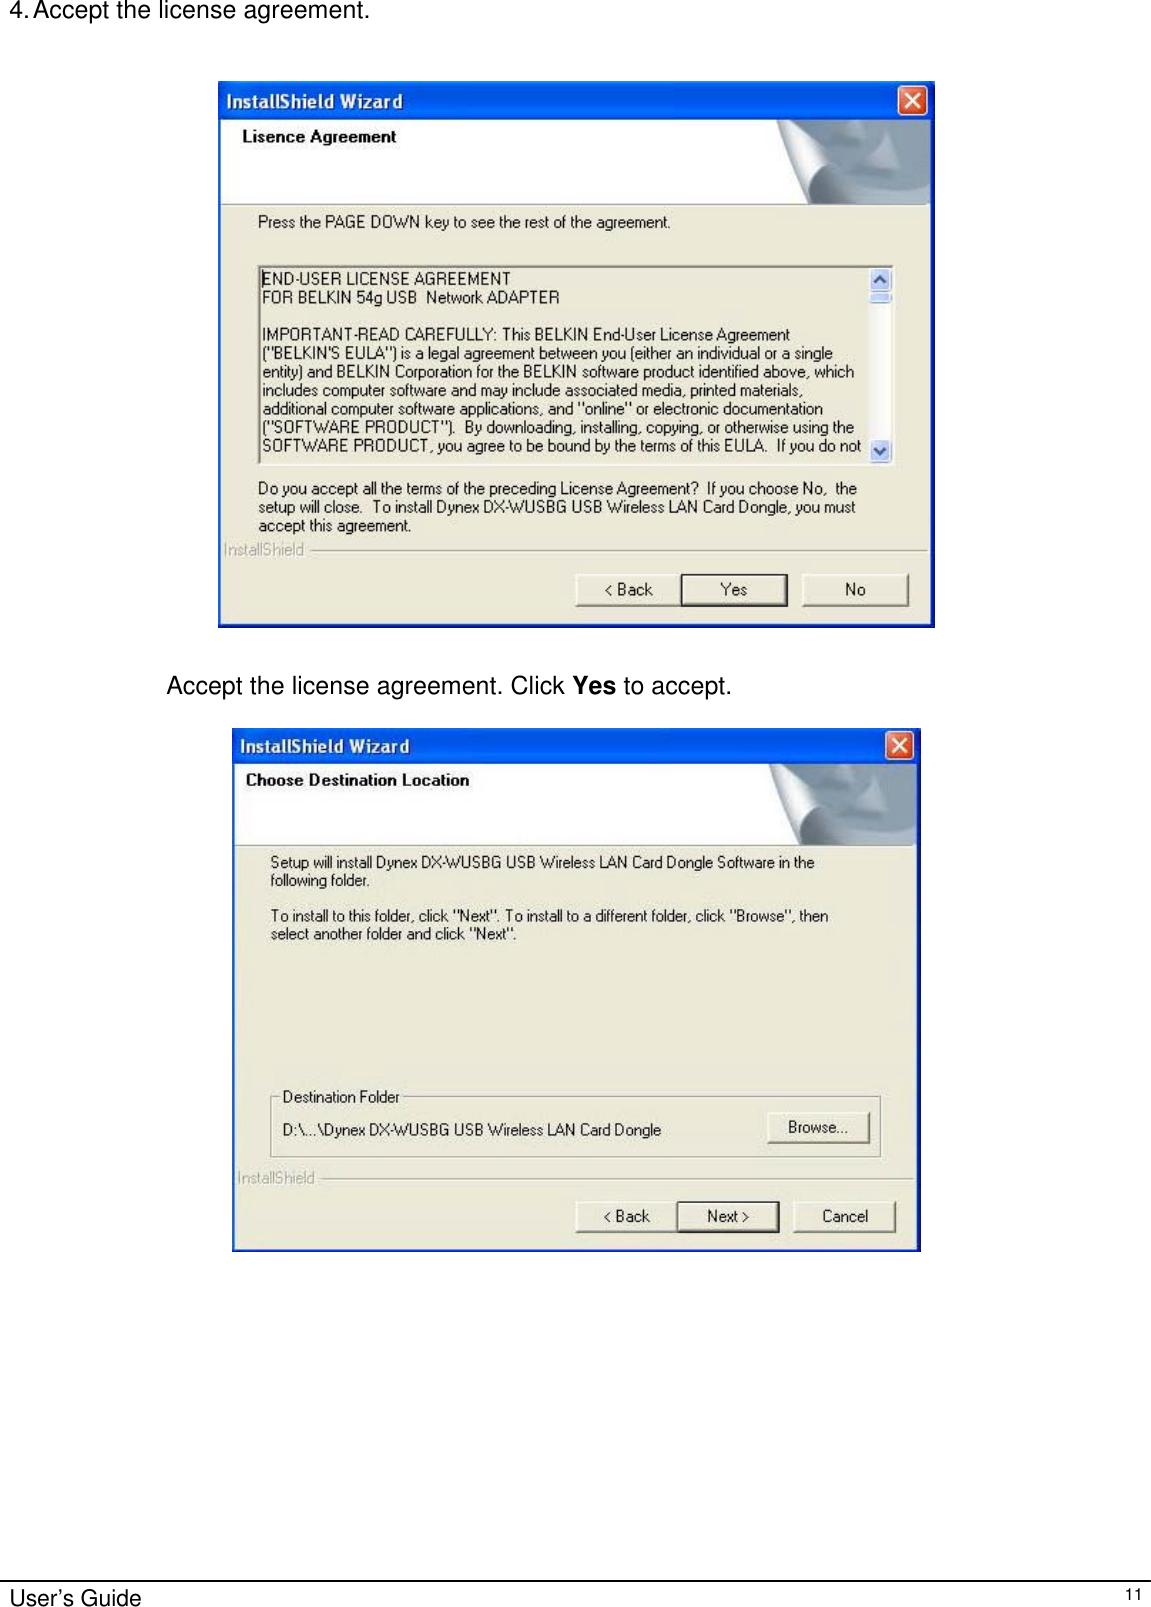                                                                                                                                                                                                                                                                                                                                        User’s Guide   11 4. Accept the license agreement.     Accept the license agreement. Click Yes to accept.                        